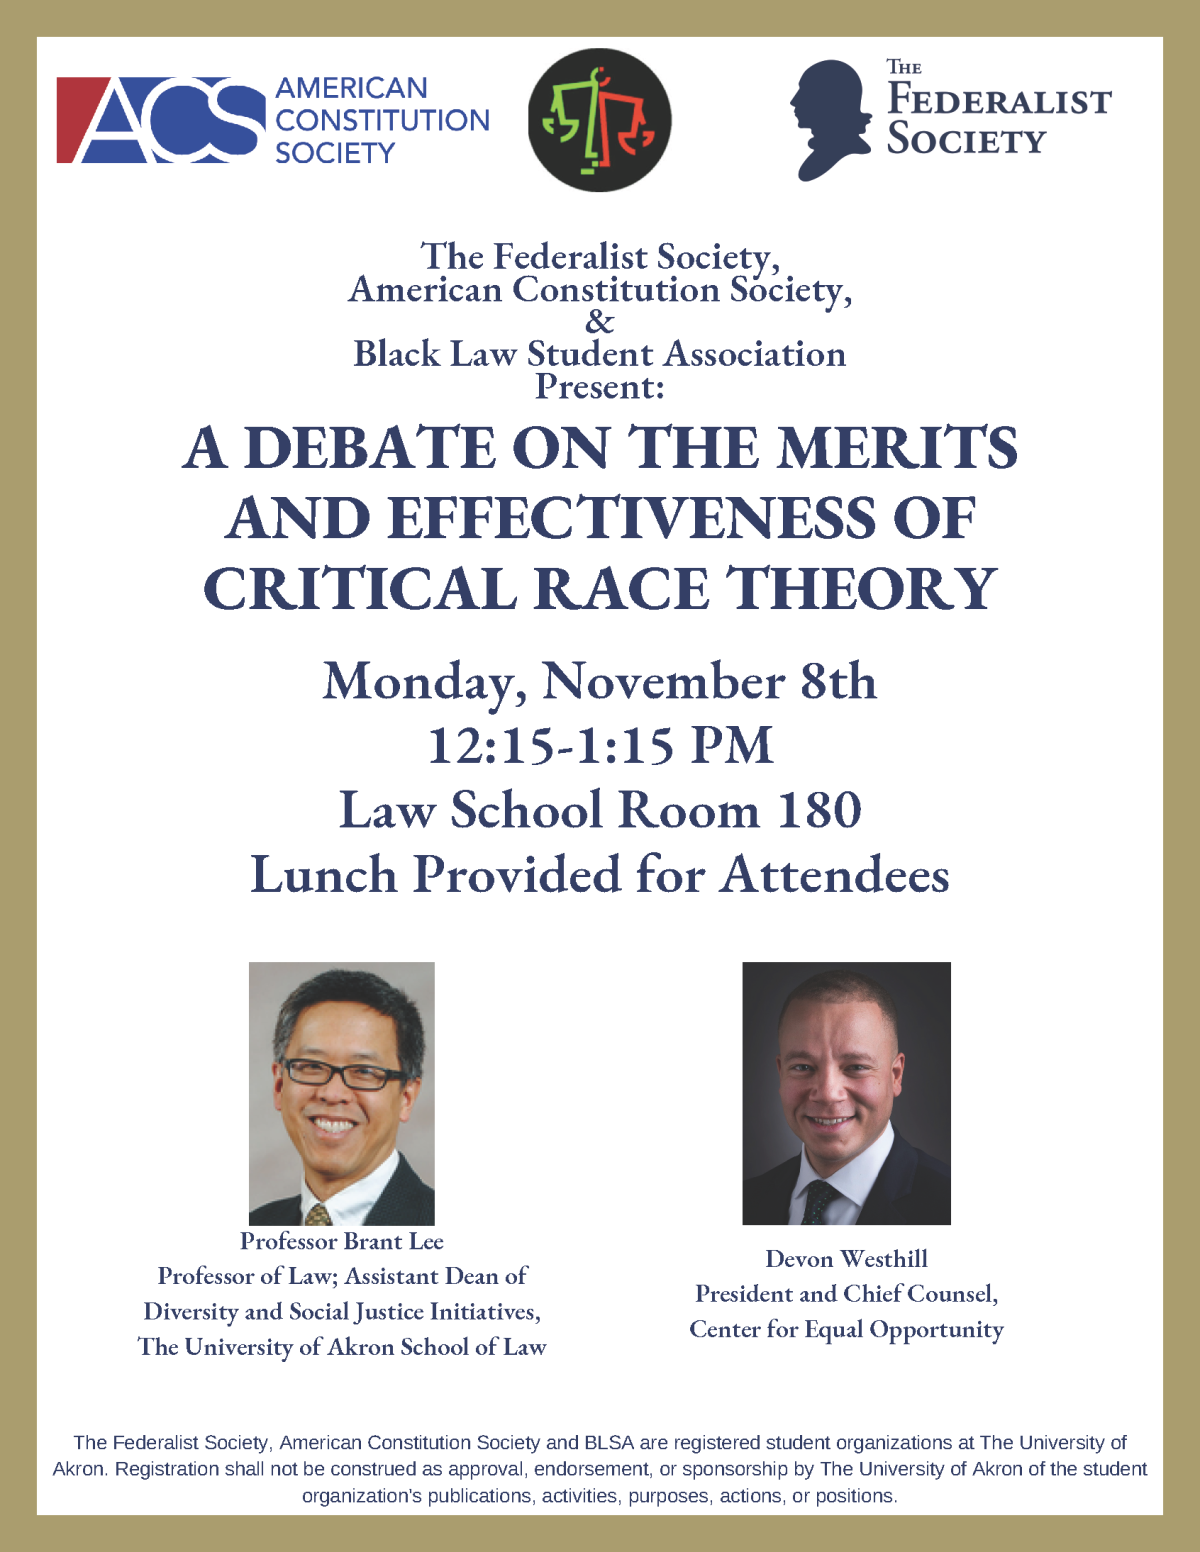 A DEBATE ON THE MERITS AND EFFECTIVENESS OF CRITICAL RACE THEORY